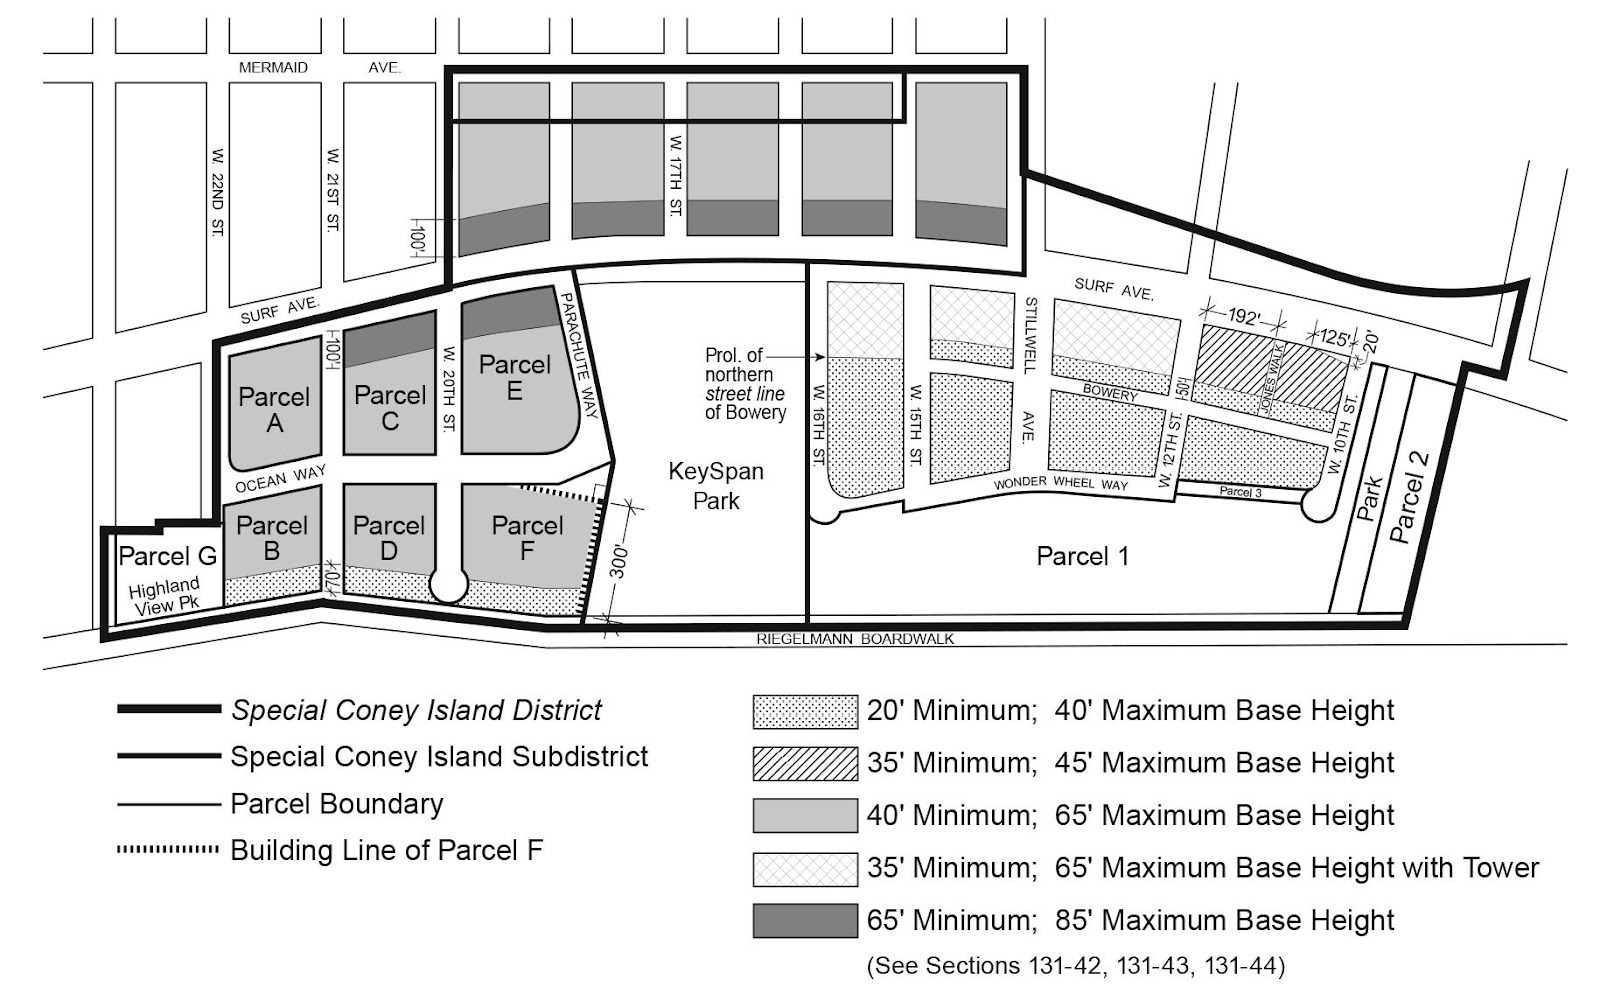 Zoning Resolutions Chapter 1: Special Coney Island District Appendix A.4